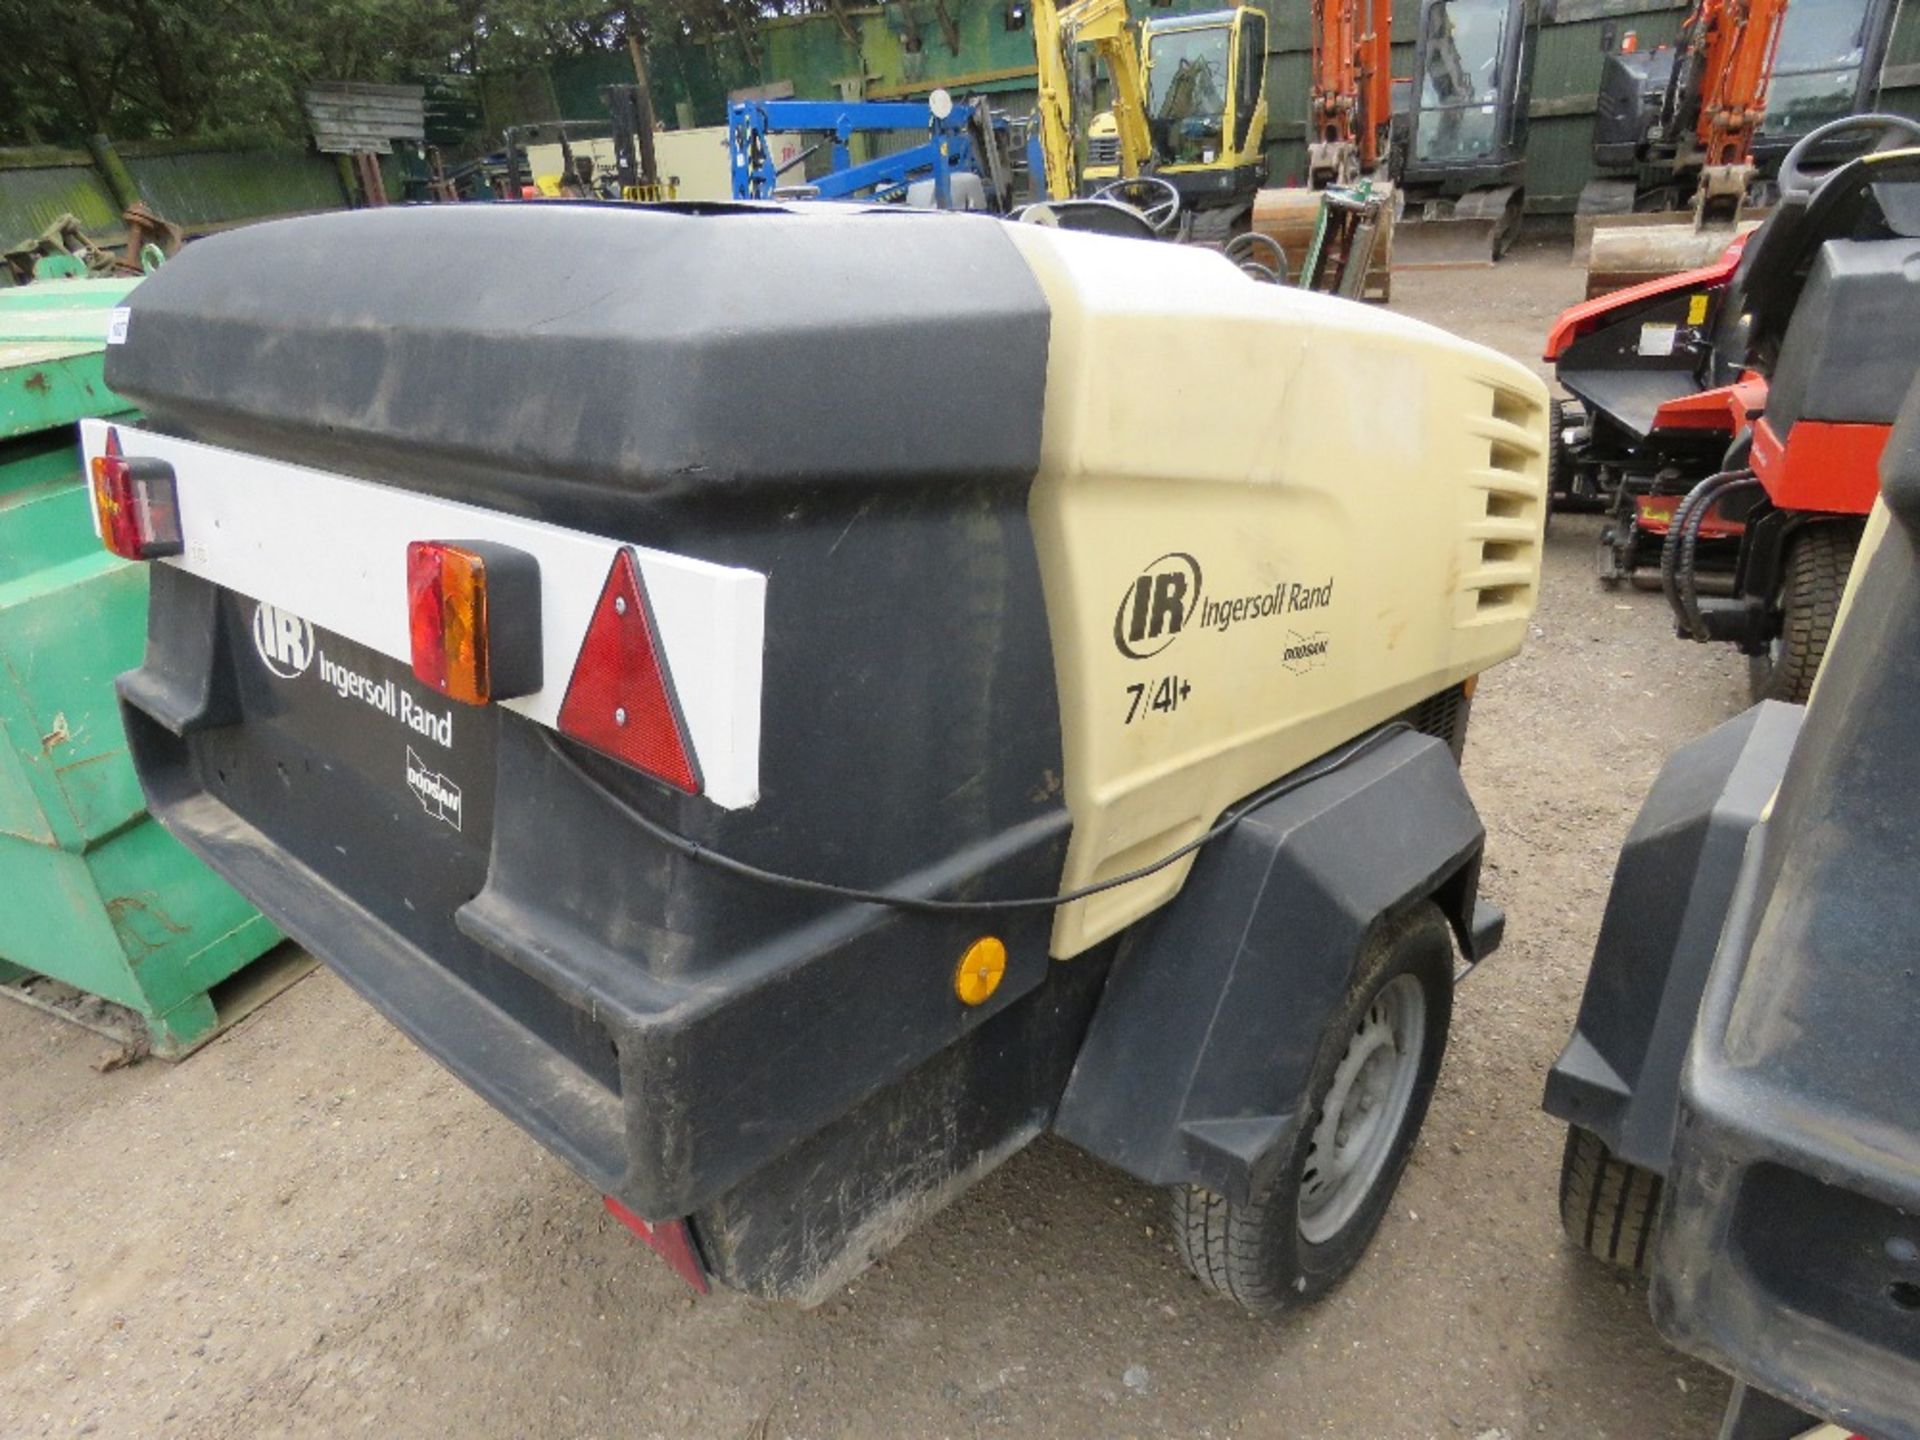 INGERSOLL RAND 741+ TOWED COMPRESSOR, YEAR 2011 BUILD. 1169 REC HOURS. SN:UN571FXXBY430386. WHEN TE